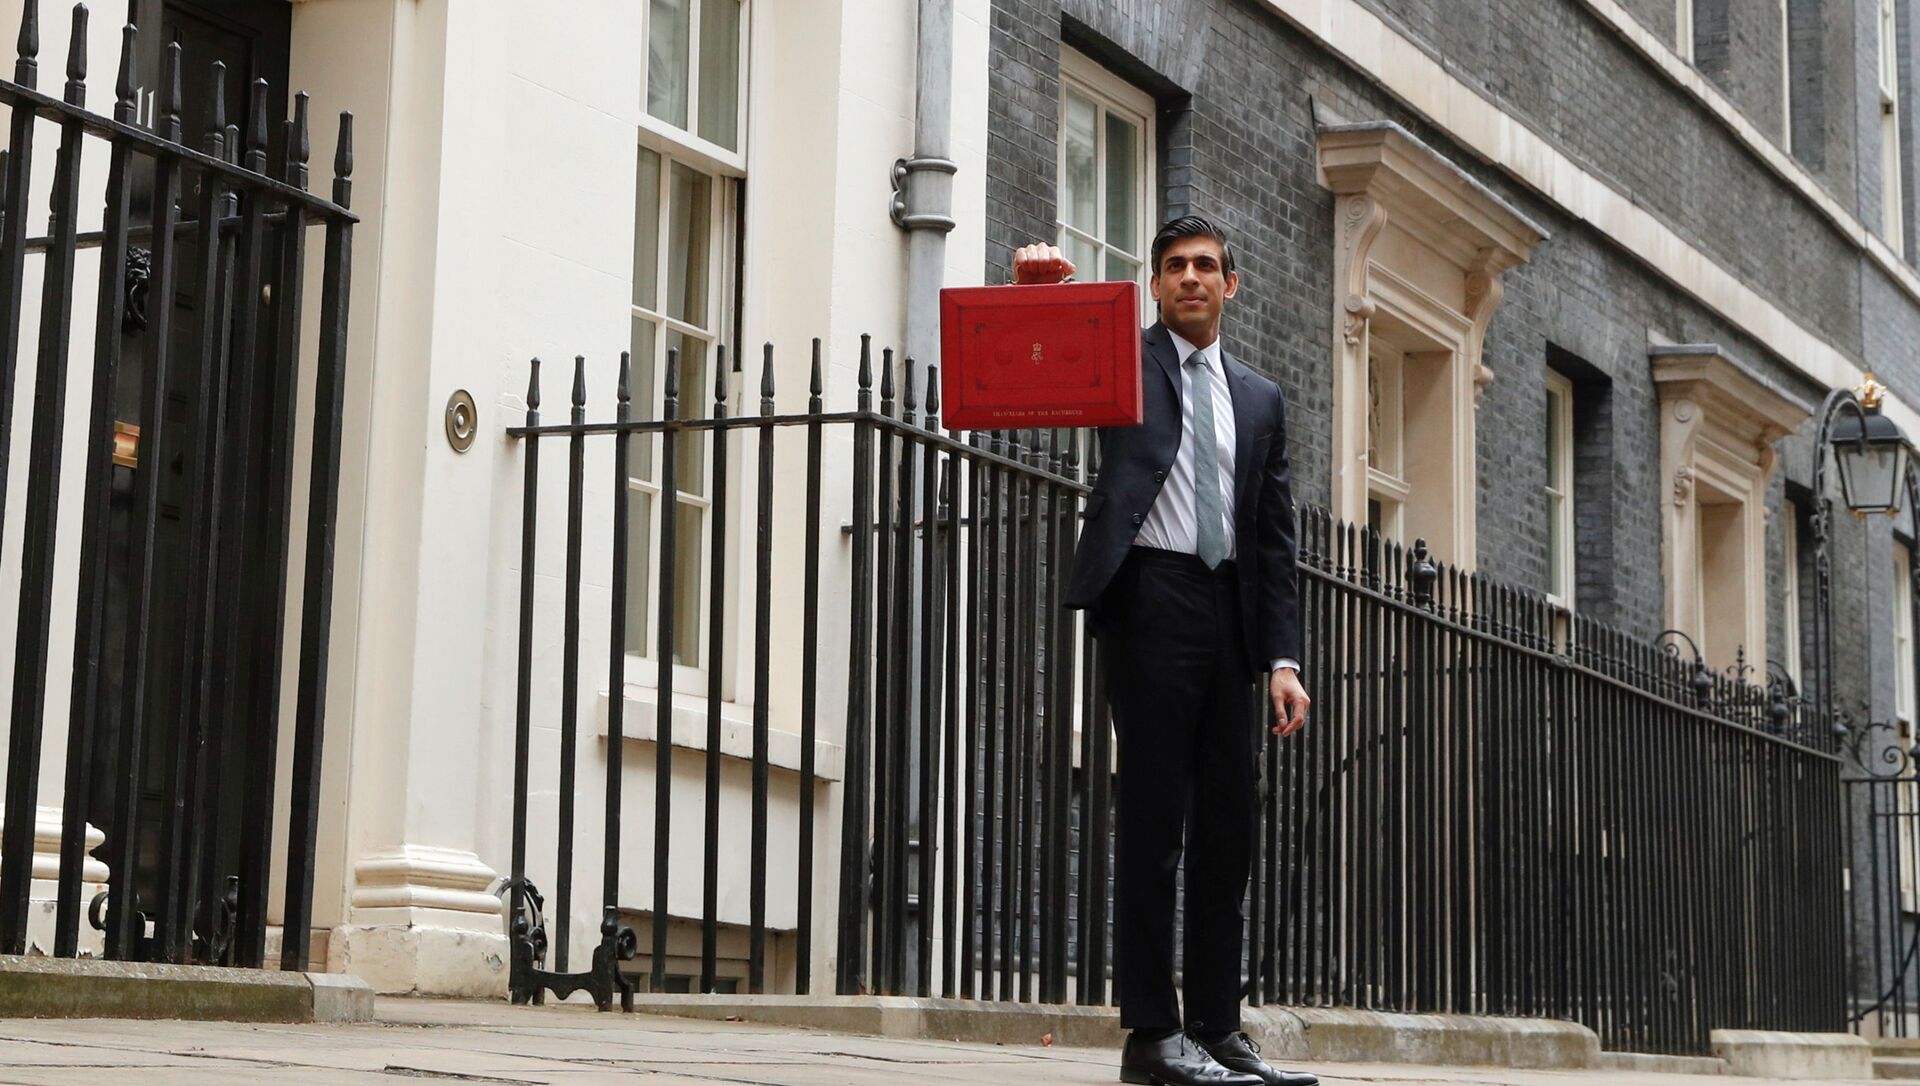 Britain's Chancellor of the Exchequer Rishi Sunak holds the budget box outside Downing Street in London, Britain, March 3, 2021 - Sputnik International, 1920, 02.03.2021